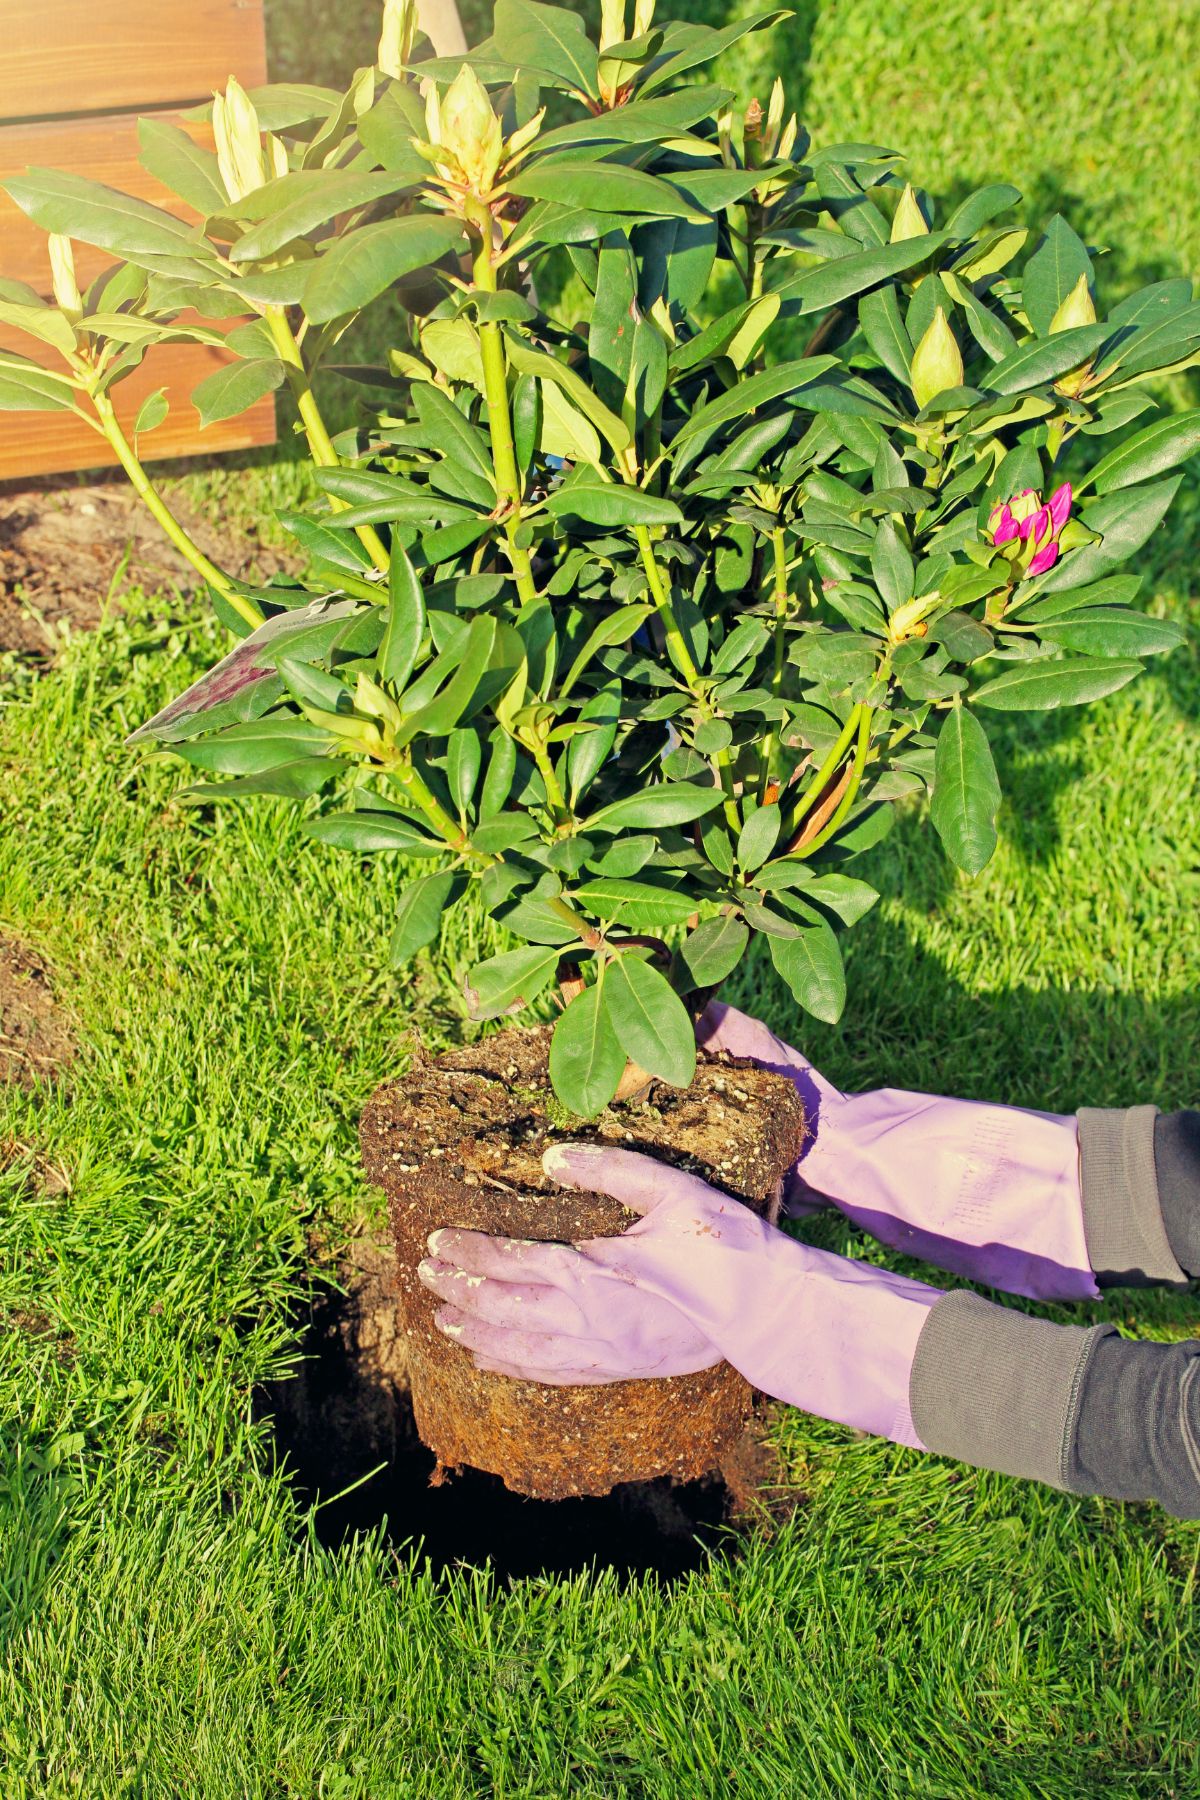 A rhododendron being planted in a lawn